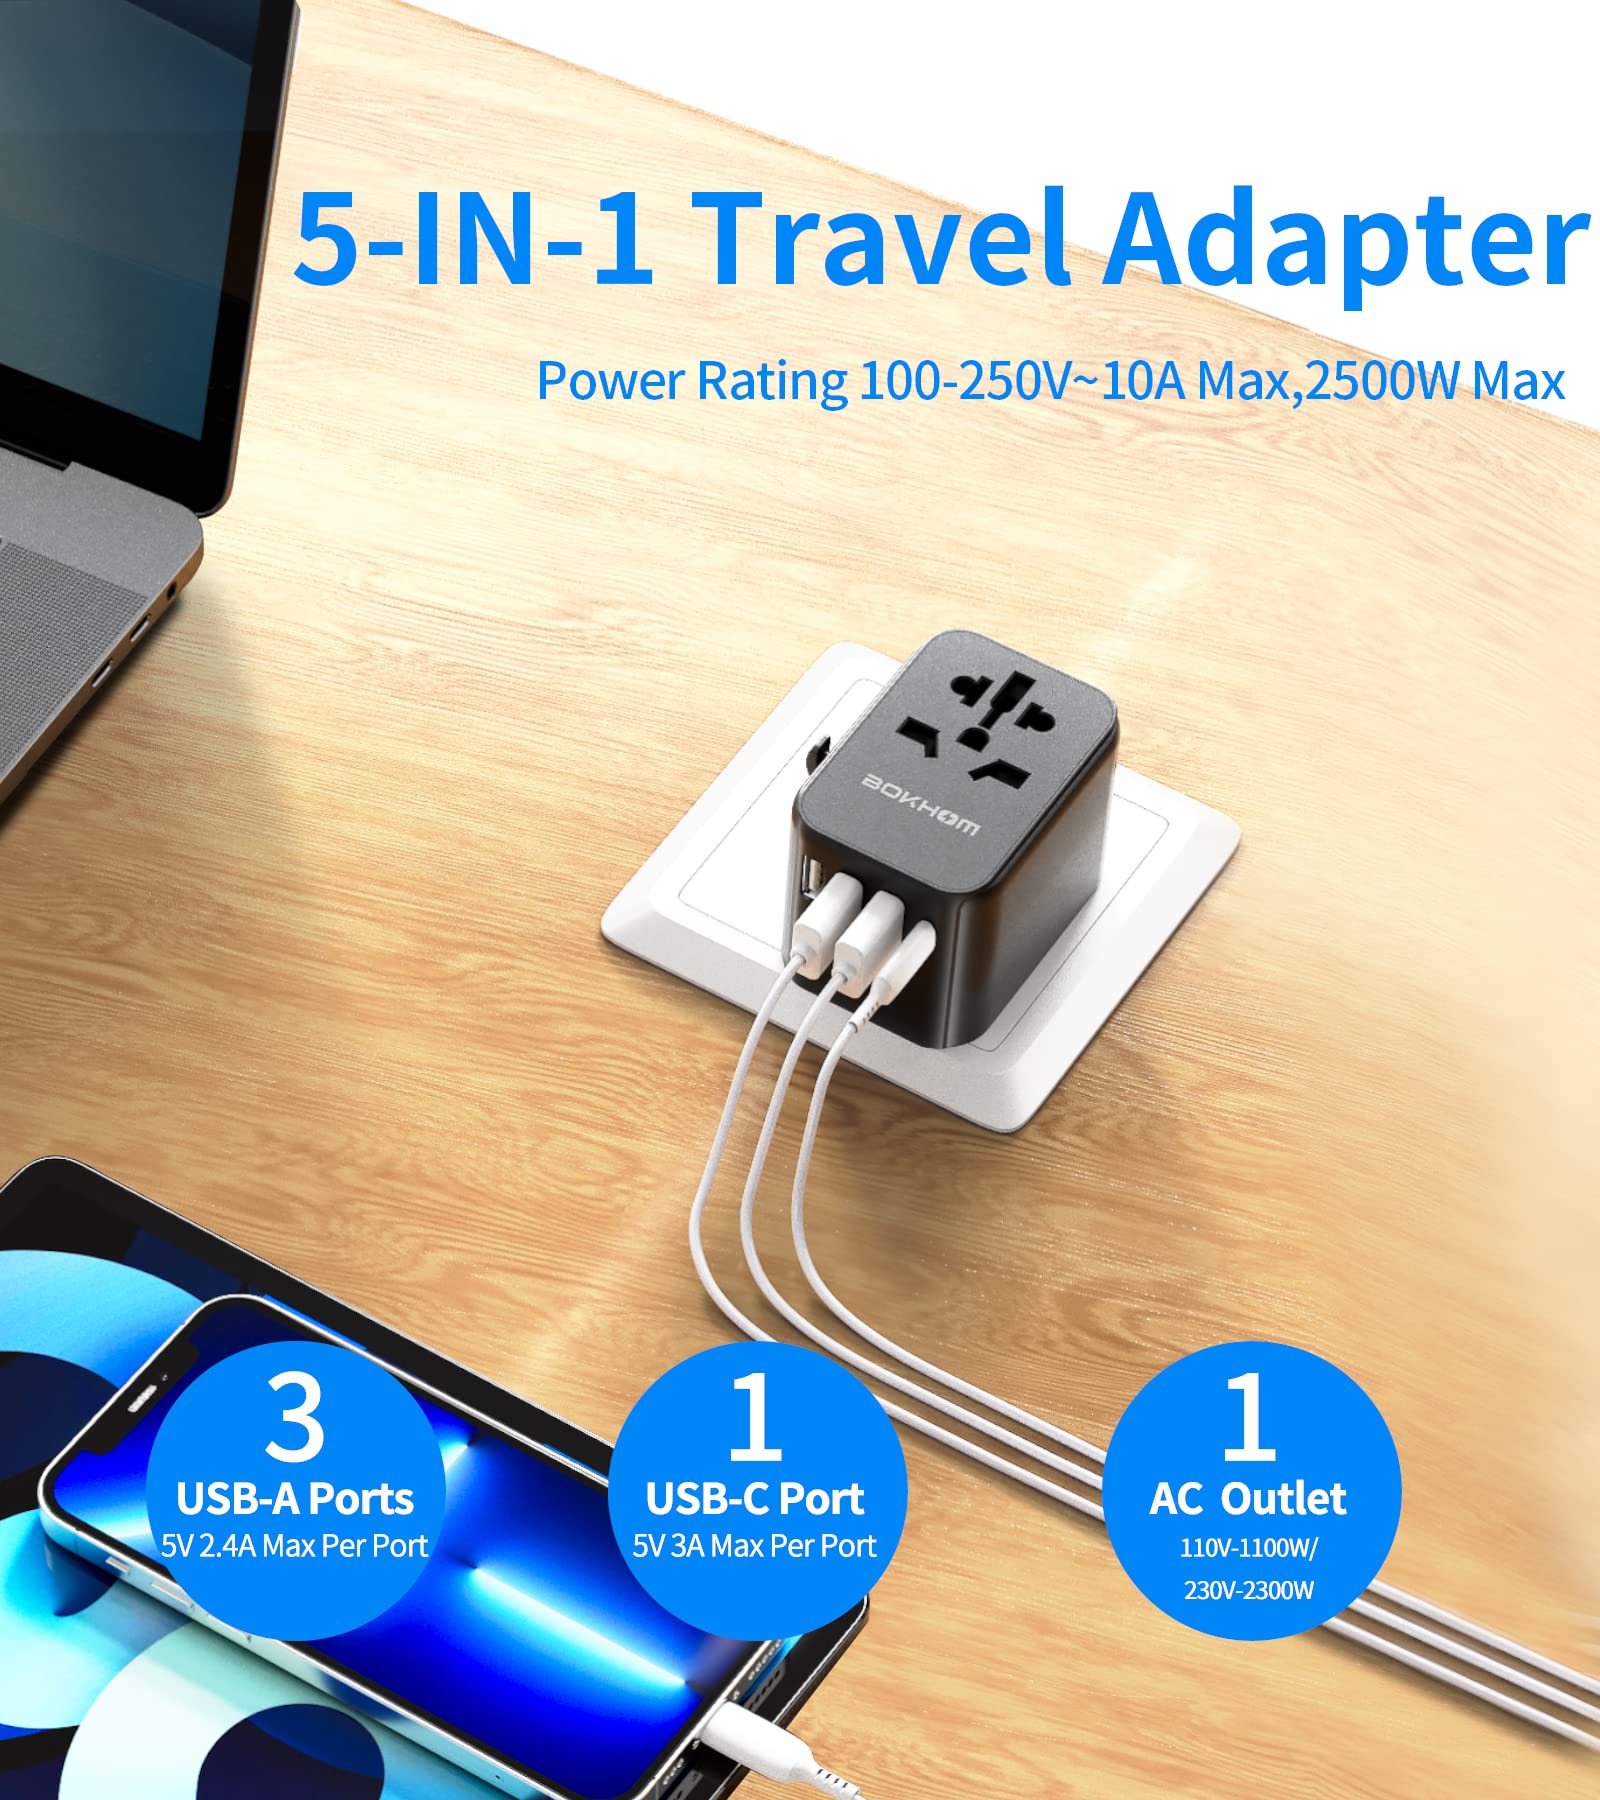 Worldwide Travel Adapter with USB C and USB A Port , All-in-one Universal Plug Adapter with Carry Pouch Dual 10A Fuses Surge Protection International Power Adapter 4 Plugs Trips to US AU Europe UK